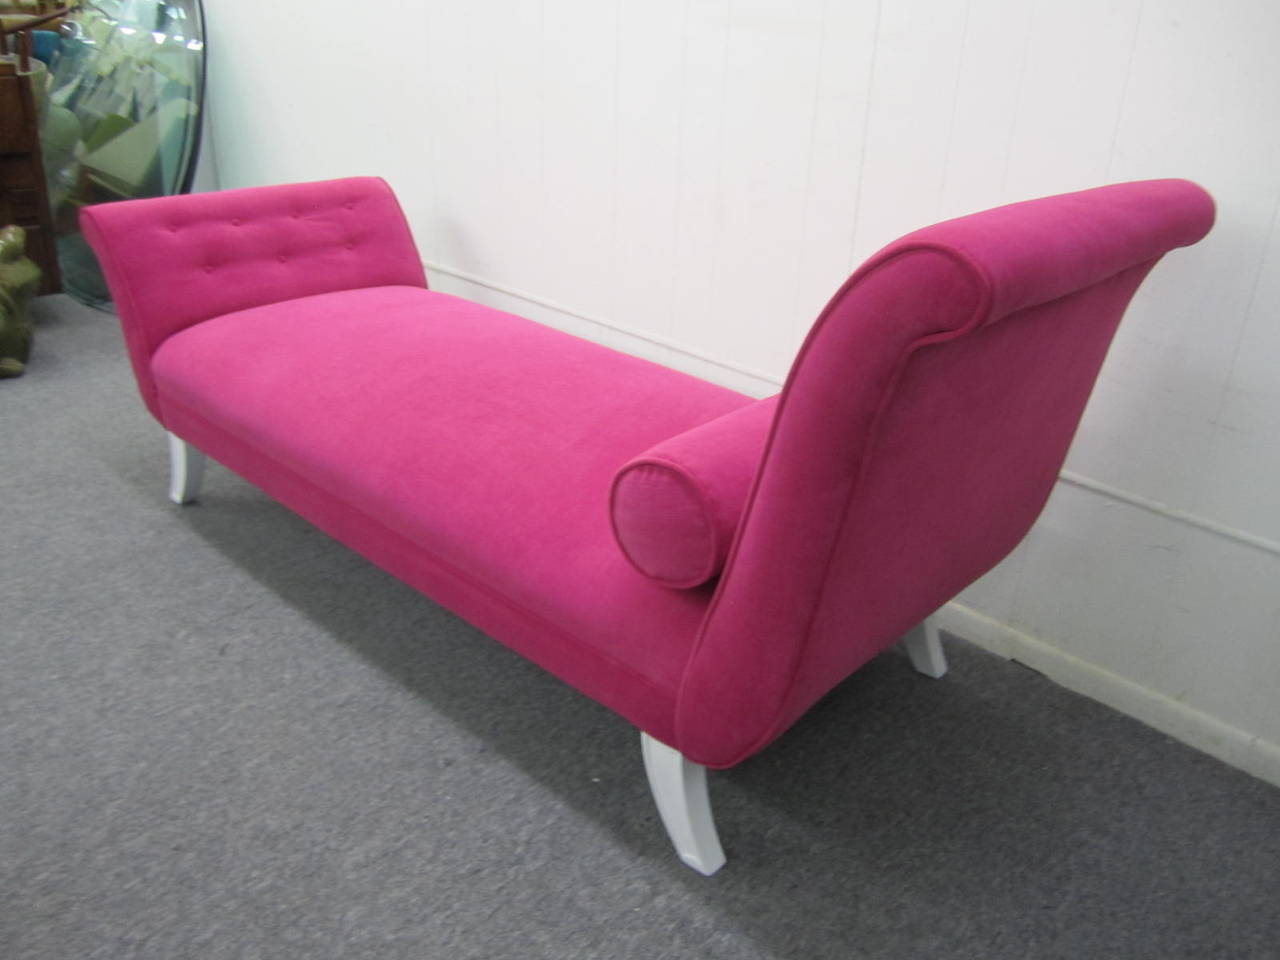 Outstanding hot pink velvet Dorothy Draper style chaise longue. This piece has been totally restored with new high end hot pink velvet, new foam and springs. The legs have a new gloss white finish-so this piece is ready to be placed right into your